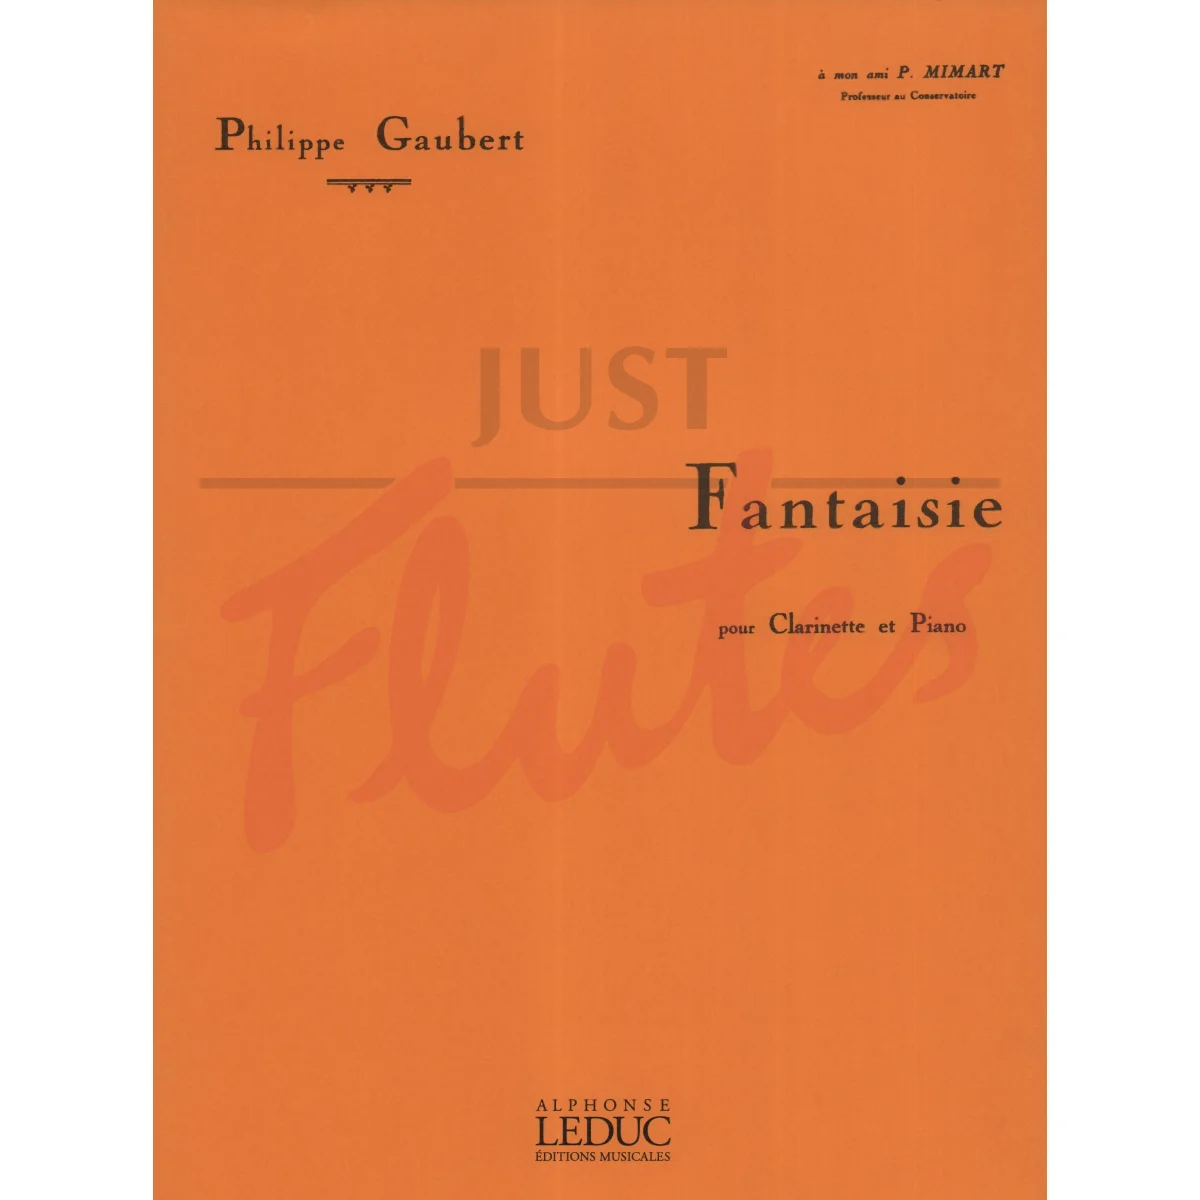 Fantaisie for Clarinet and Piano